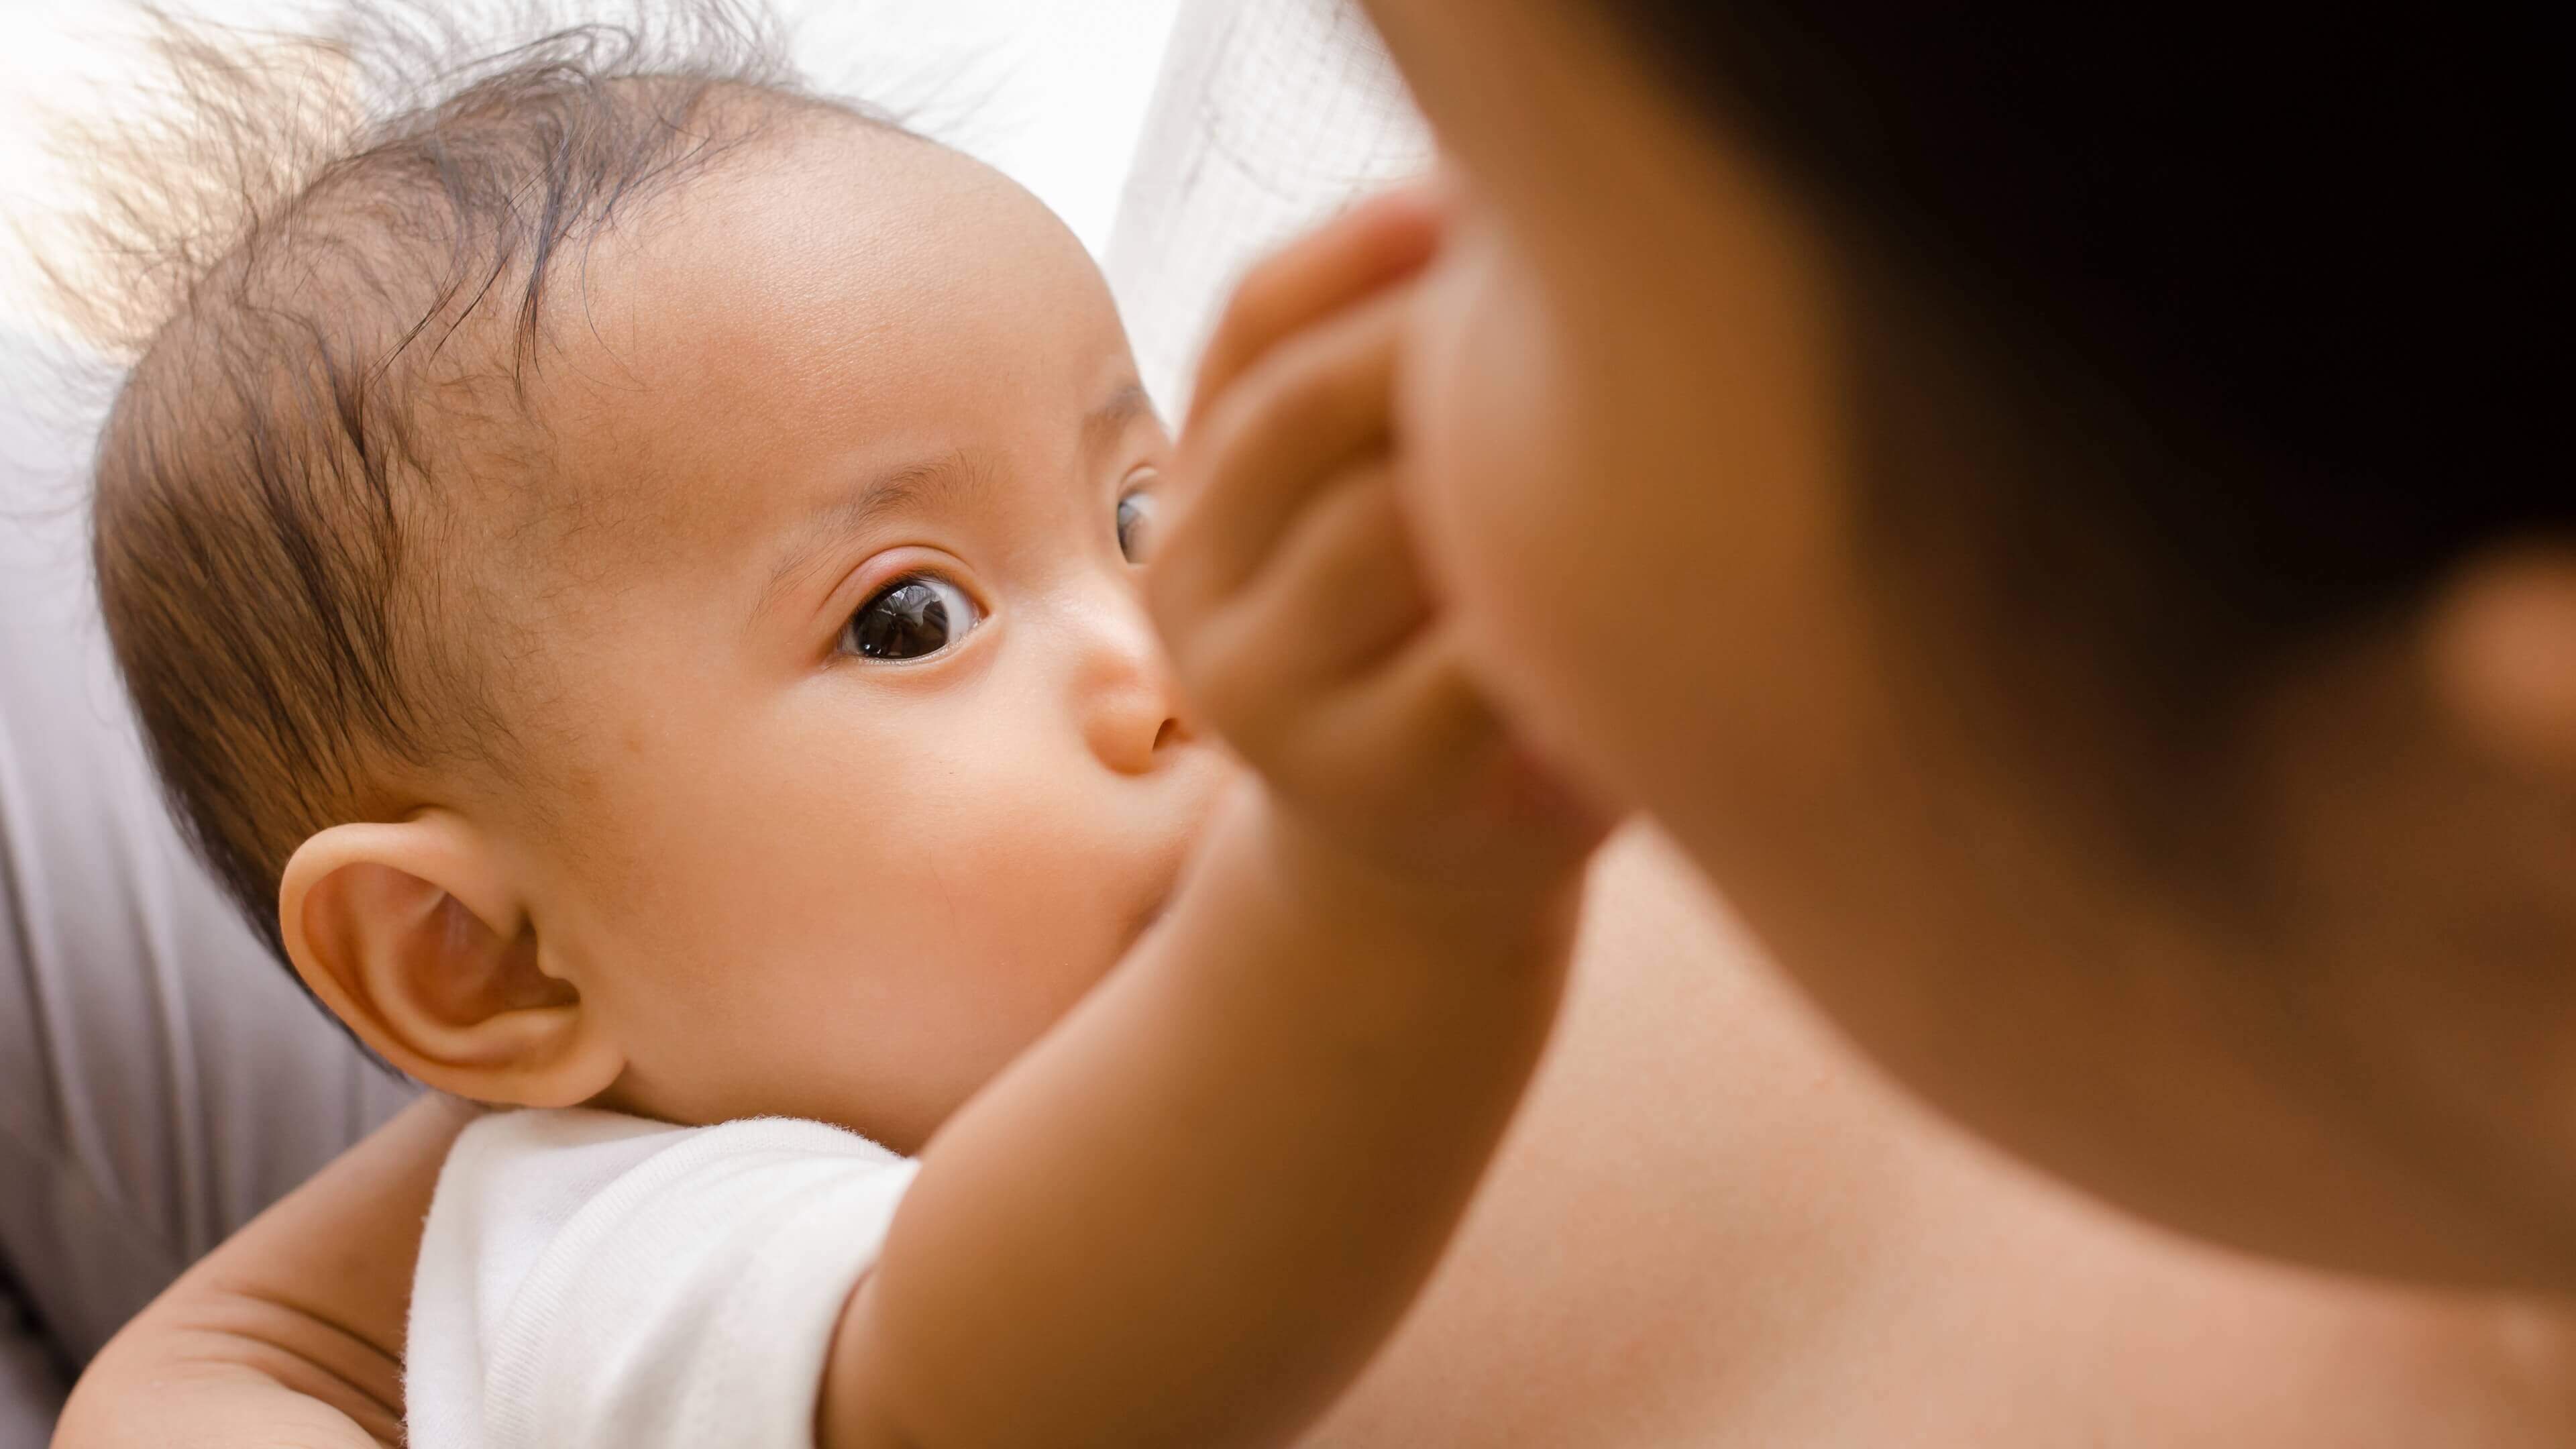 Breastfeeding Tips for New Moms from a Certified Nurse Midwife